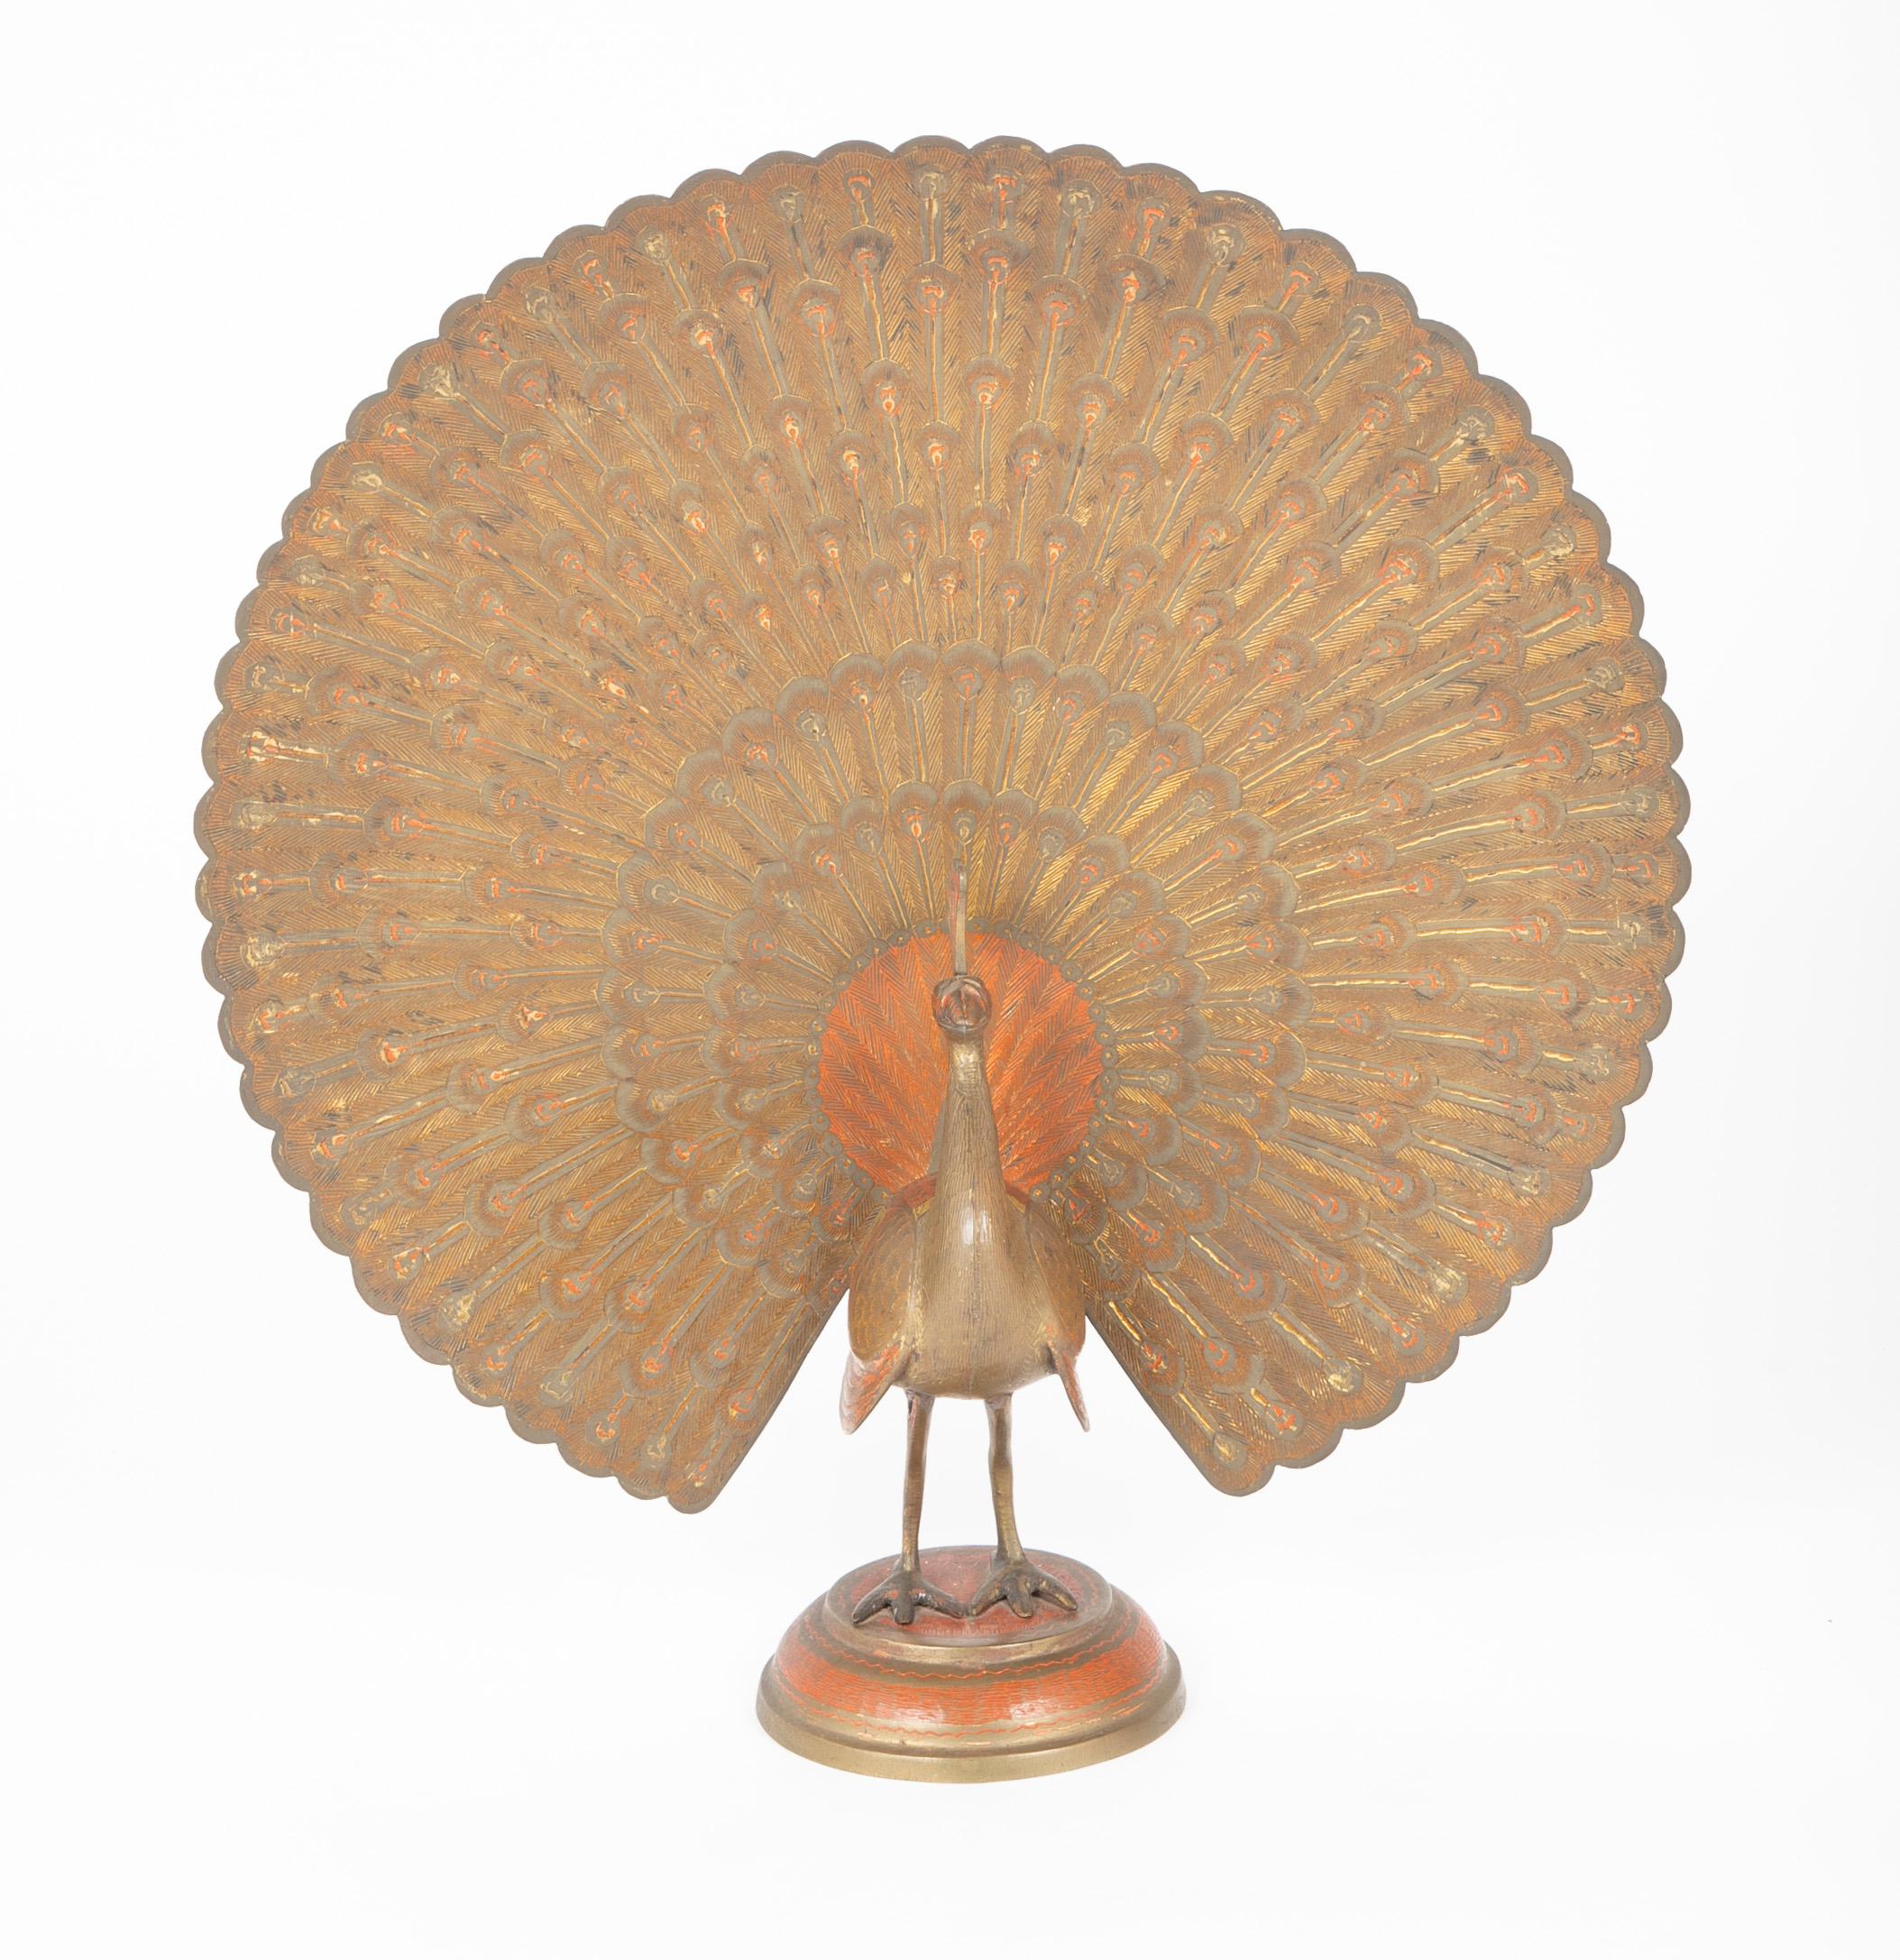 Beautifully rendered etched brass peacock, showing his feathers in full regalia. The surface highlighted with gold and orange paint. An exceptional decorative piece, bringing joy to any room. 
Nice scale at 21 inches high.
 